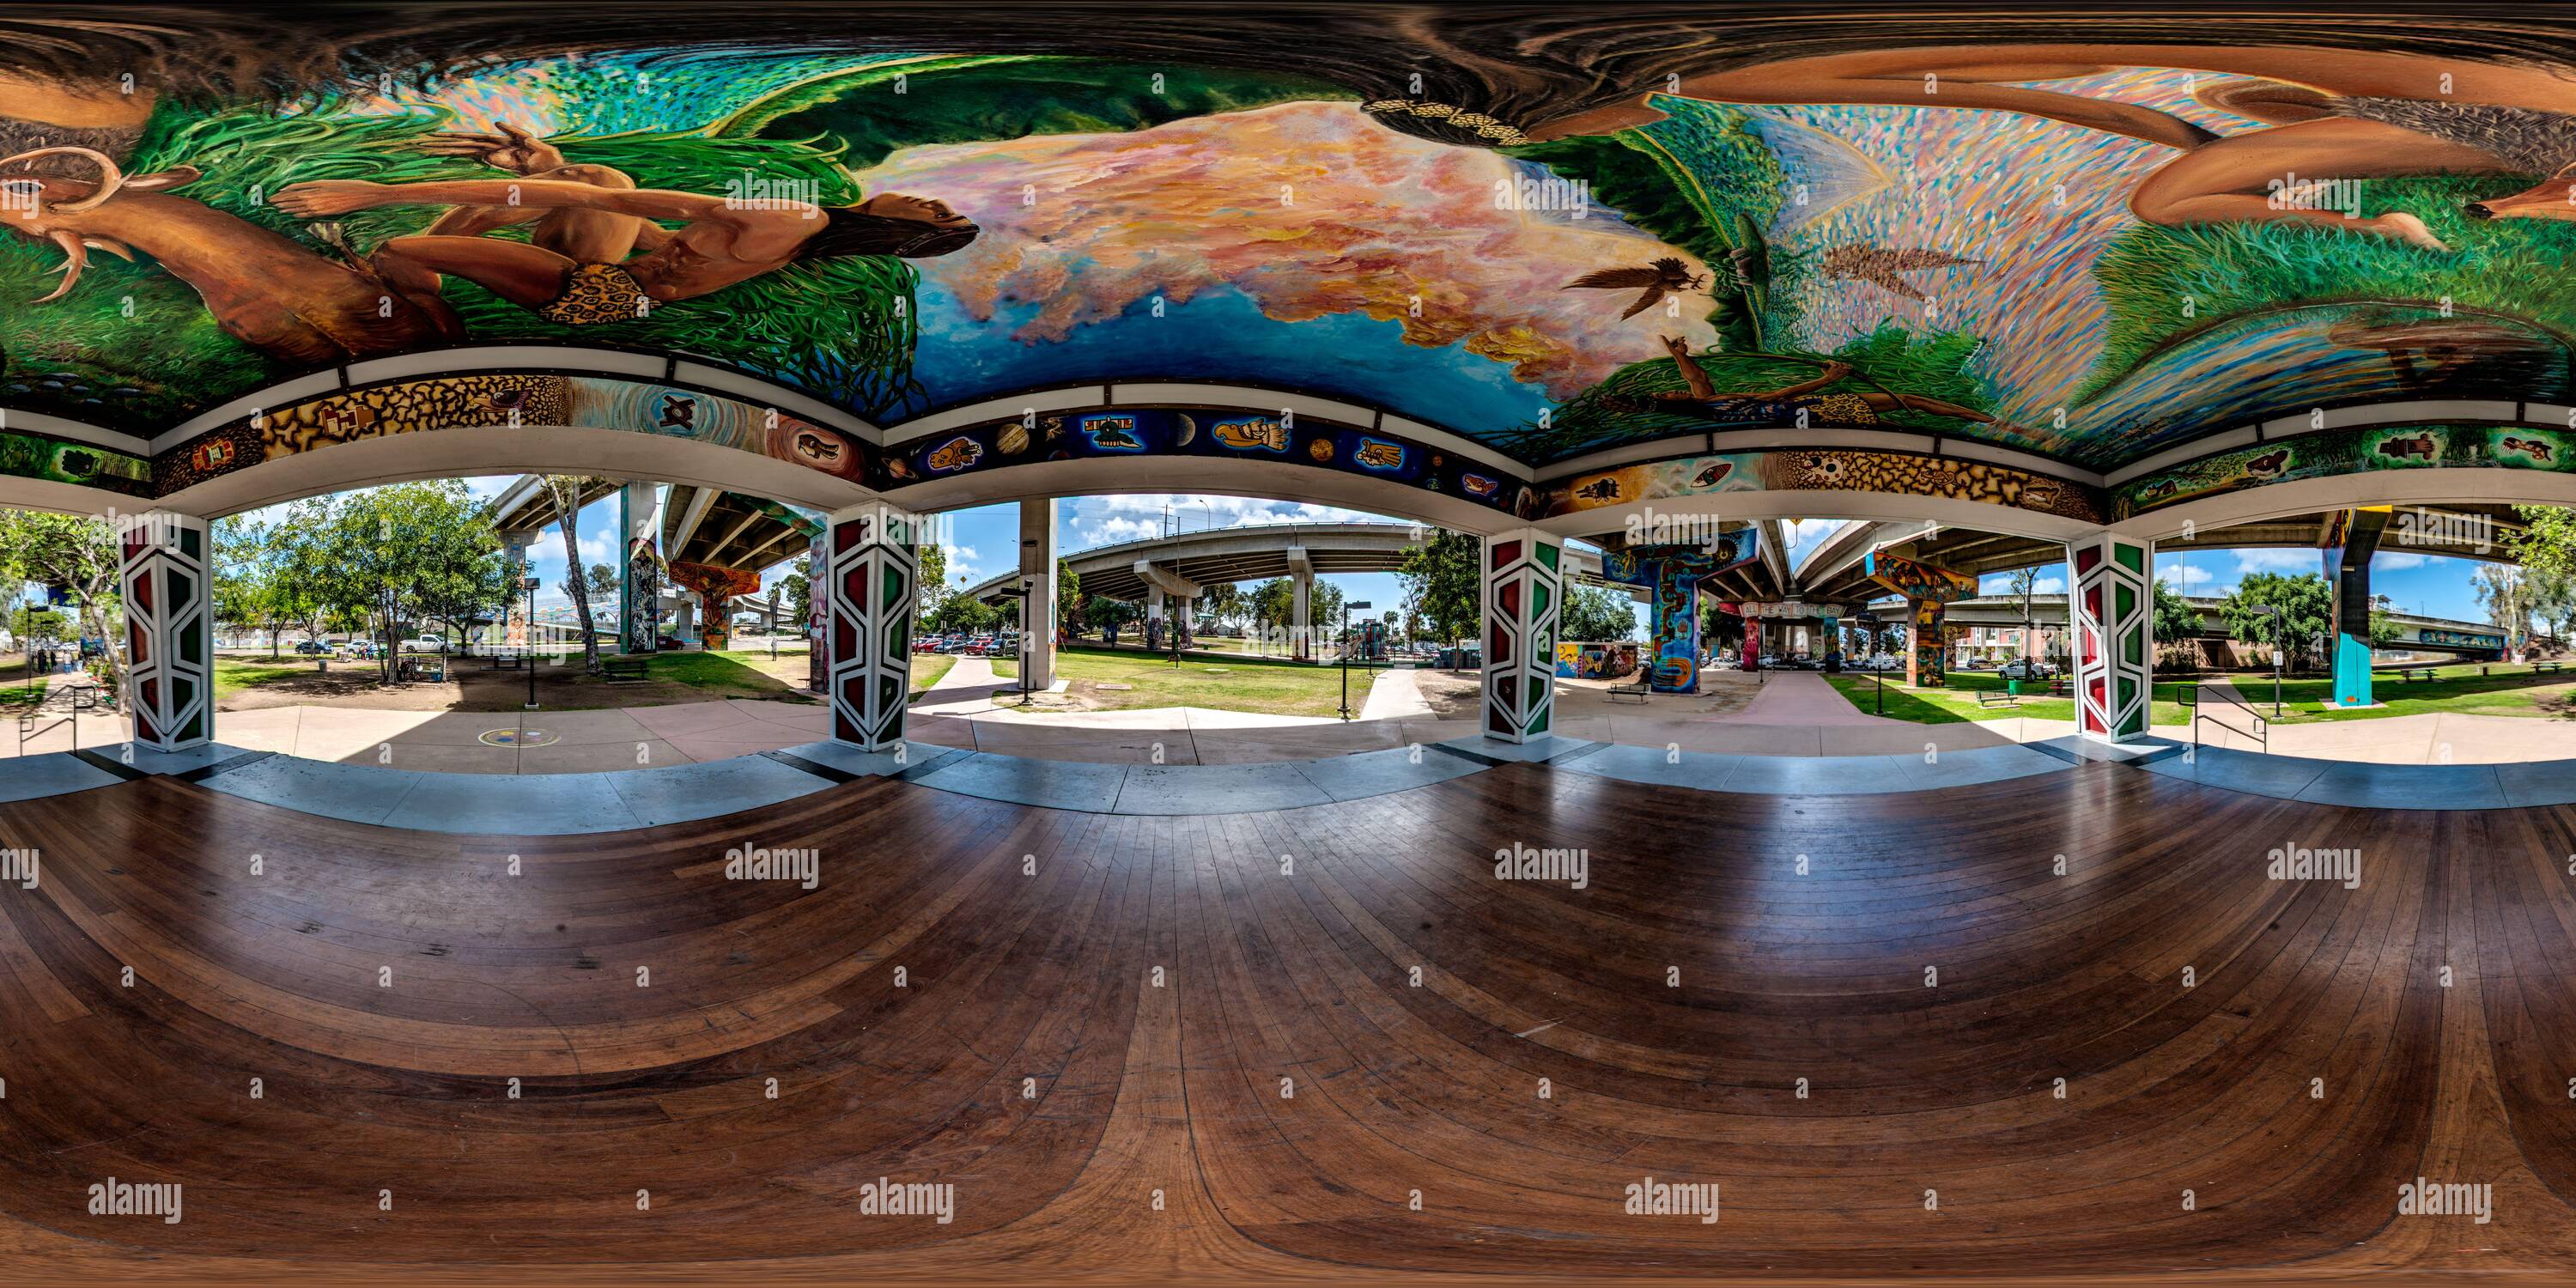 360 degree panoramic view of The Kiosk at Chicano Park